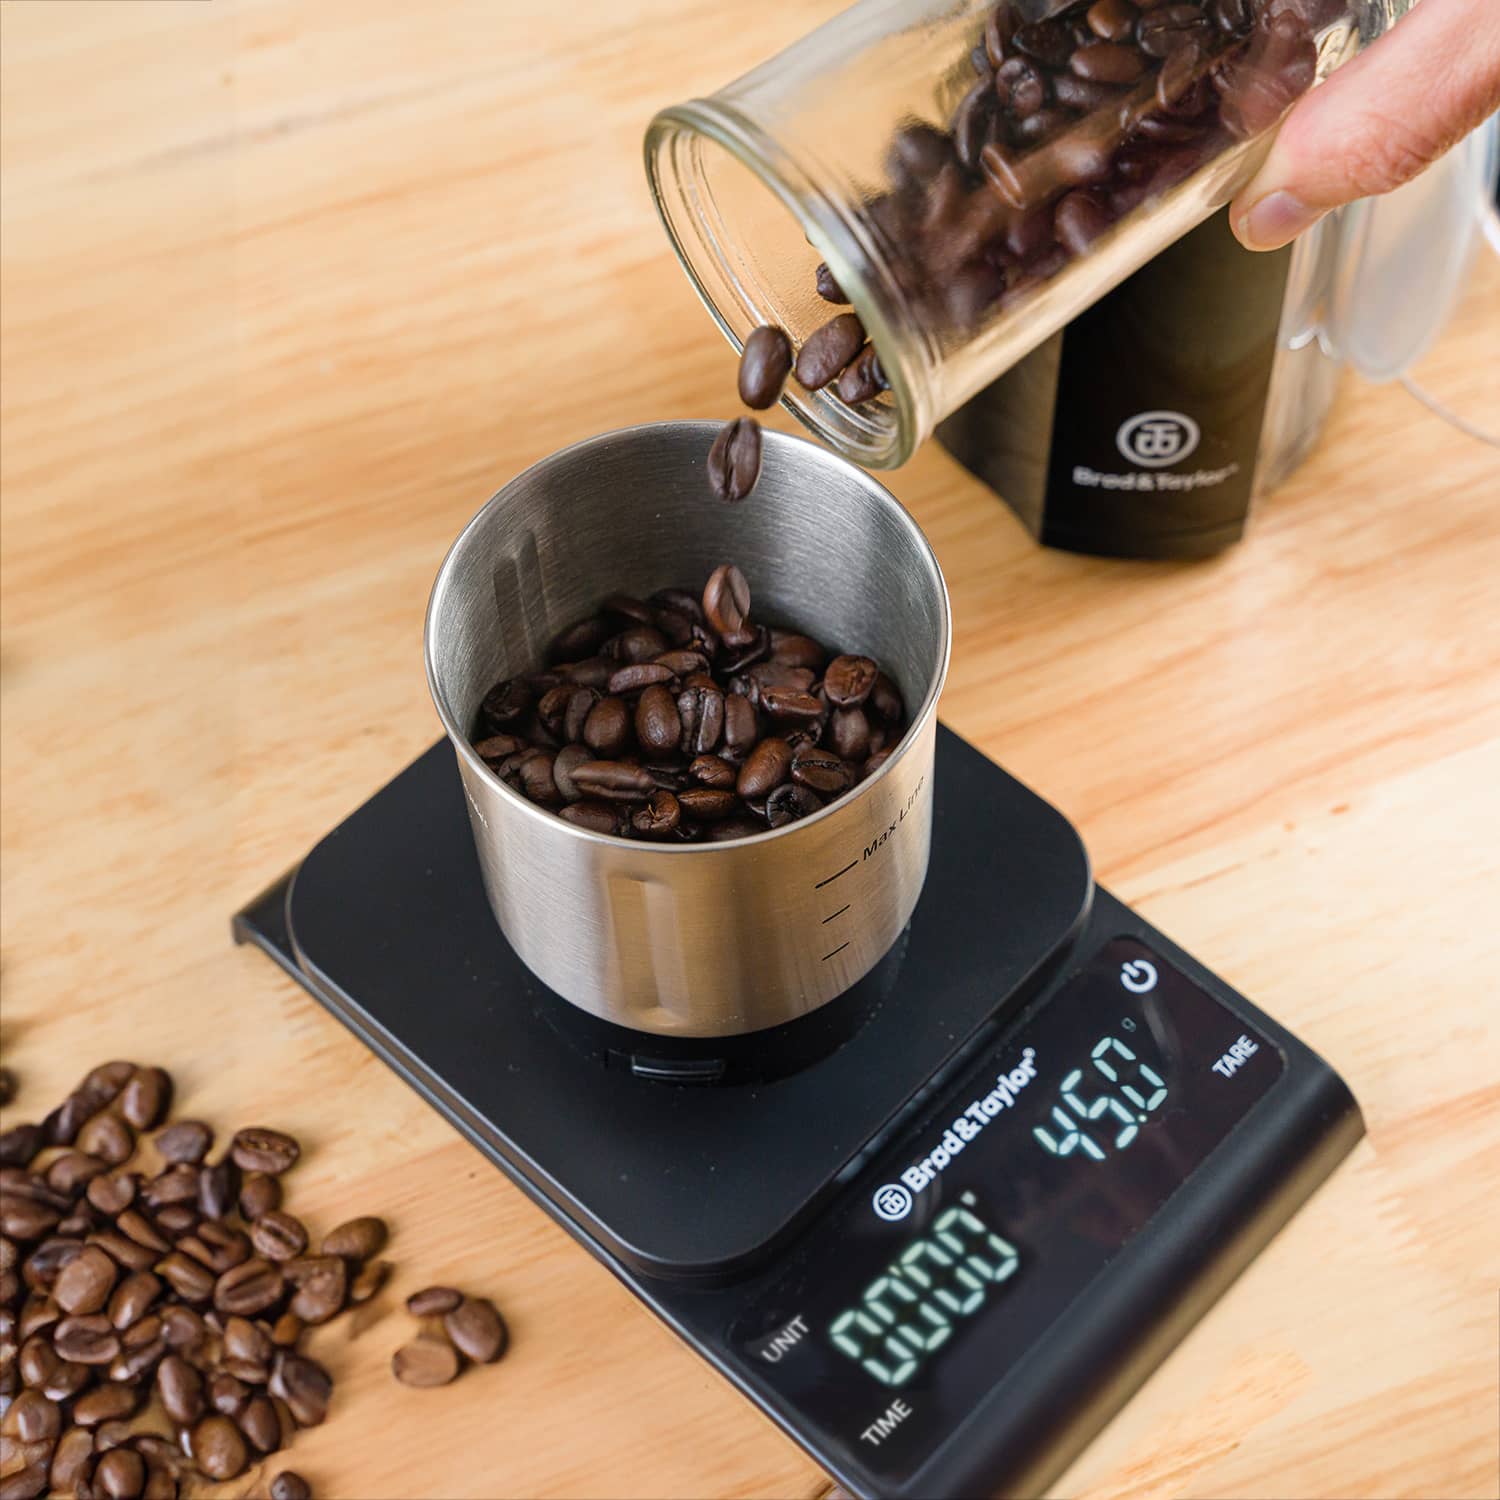 Measuring coffee beans using Brod & Taylor's coffee scale